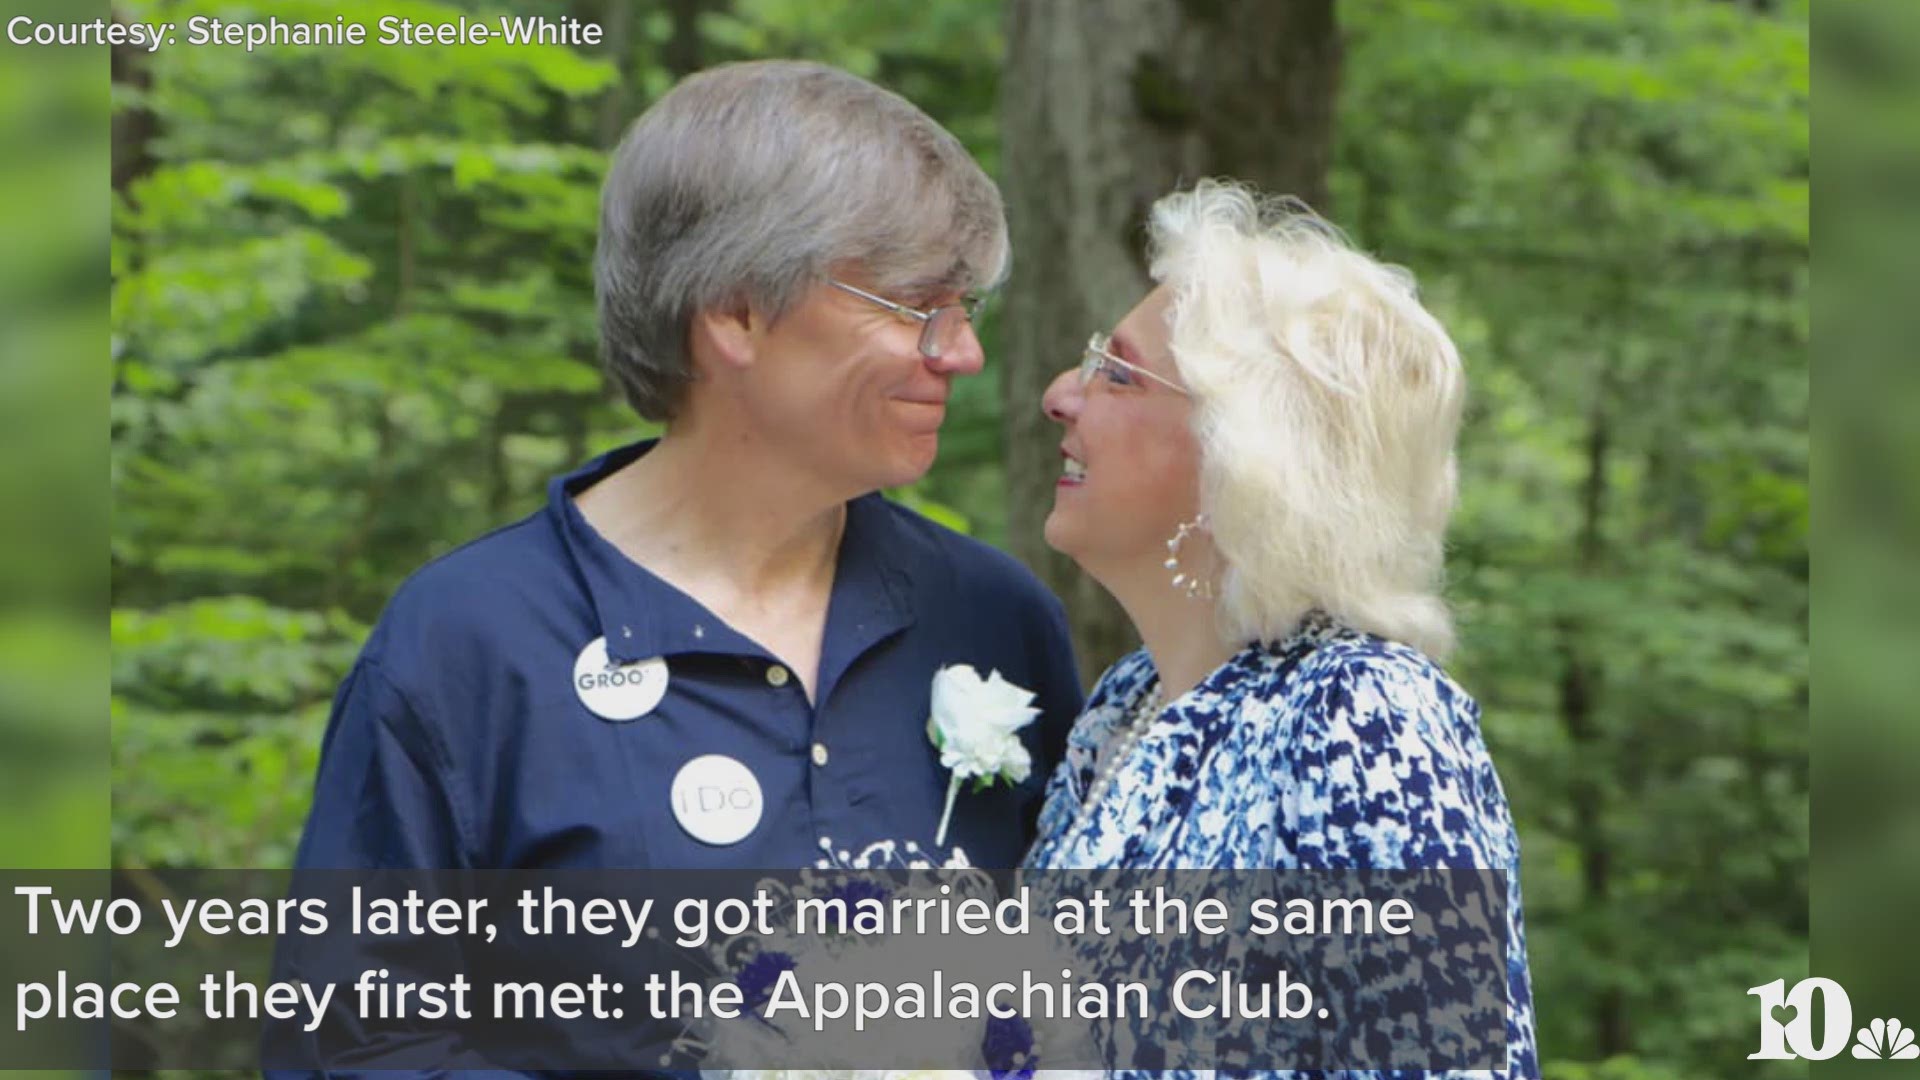 Butch White and Stephanie Steele-White met through a Hike the Smokies Meet and Greet on the front porch of the Appalachian Club in 2017. Two years later, they got married at the same spot.